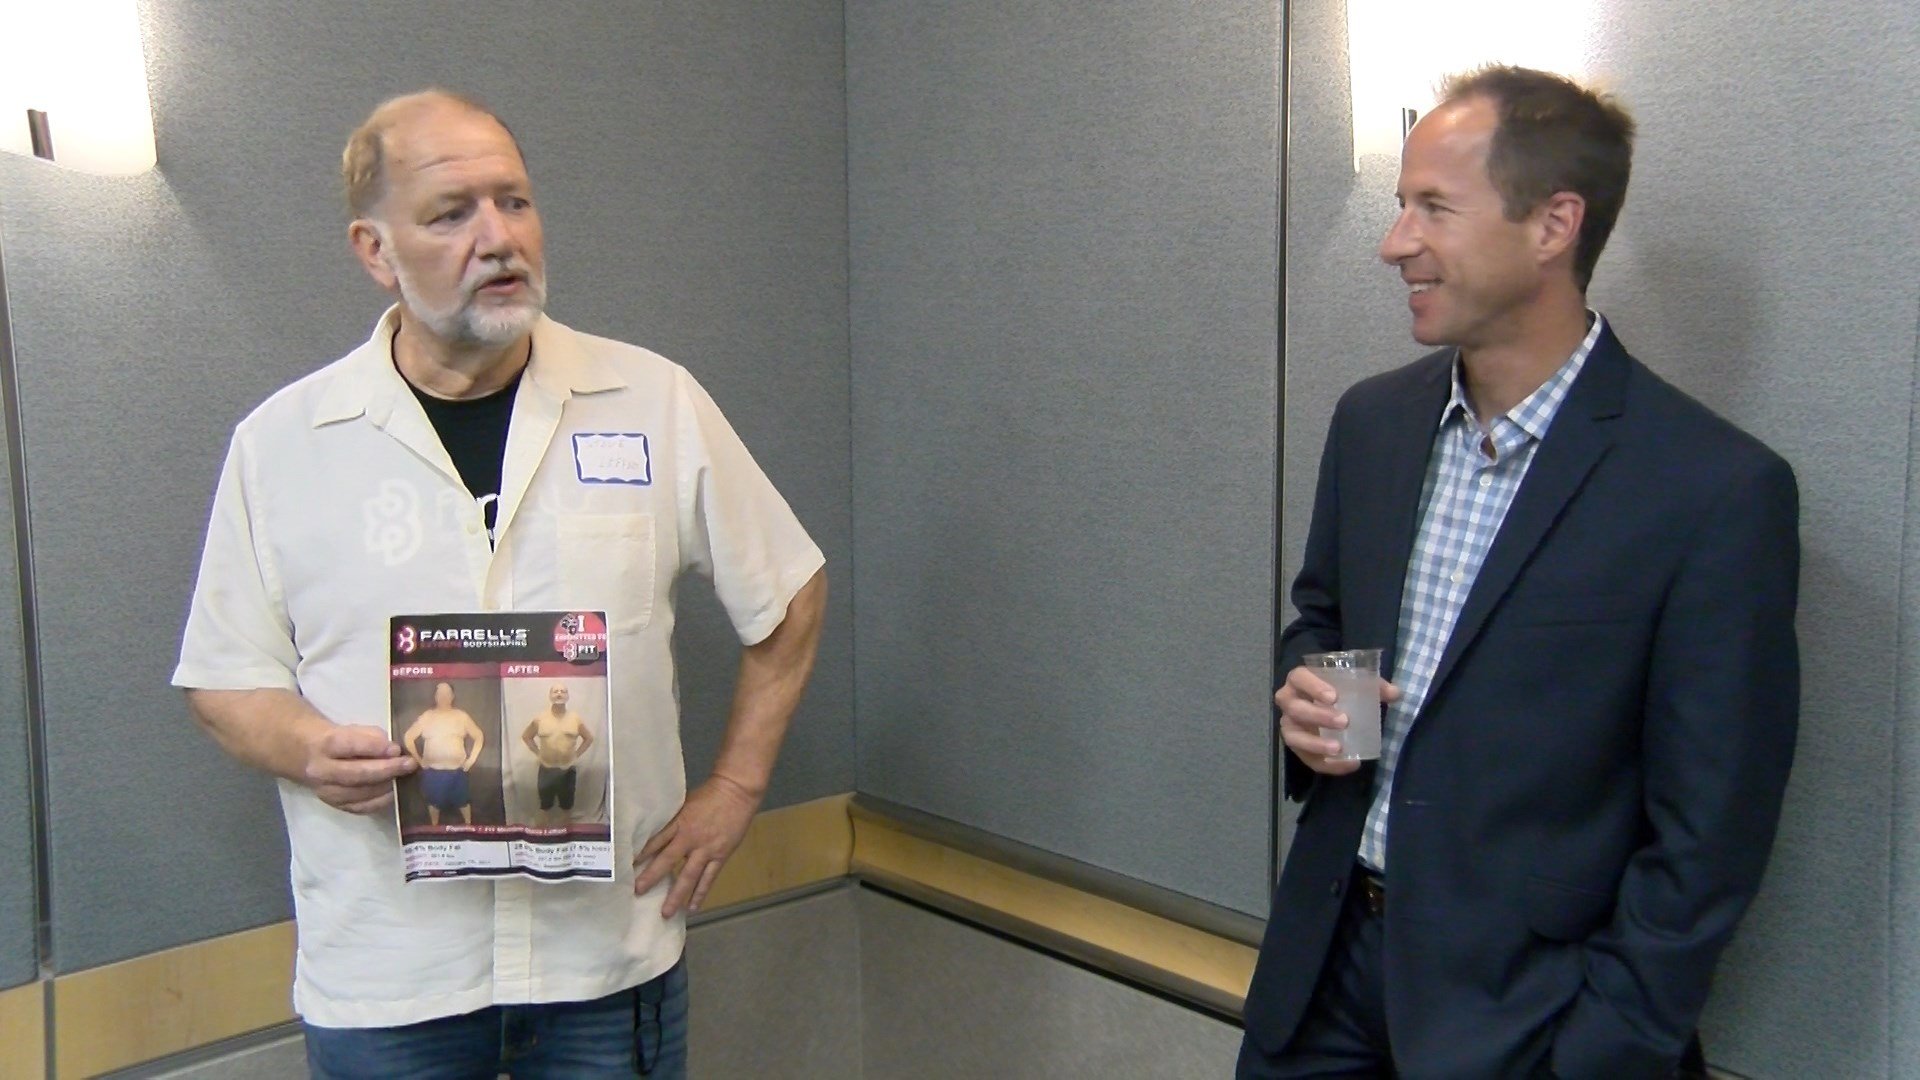 Bryan West holds second annual bariatric reunion